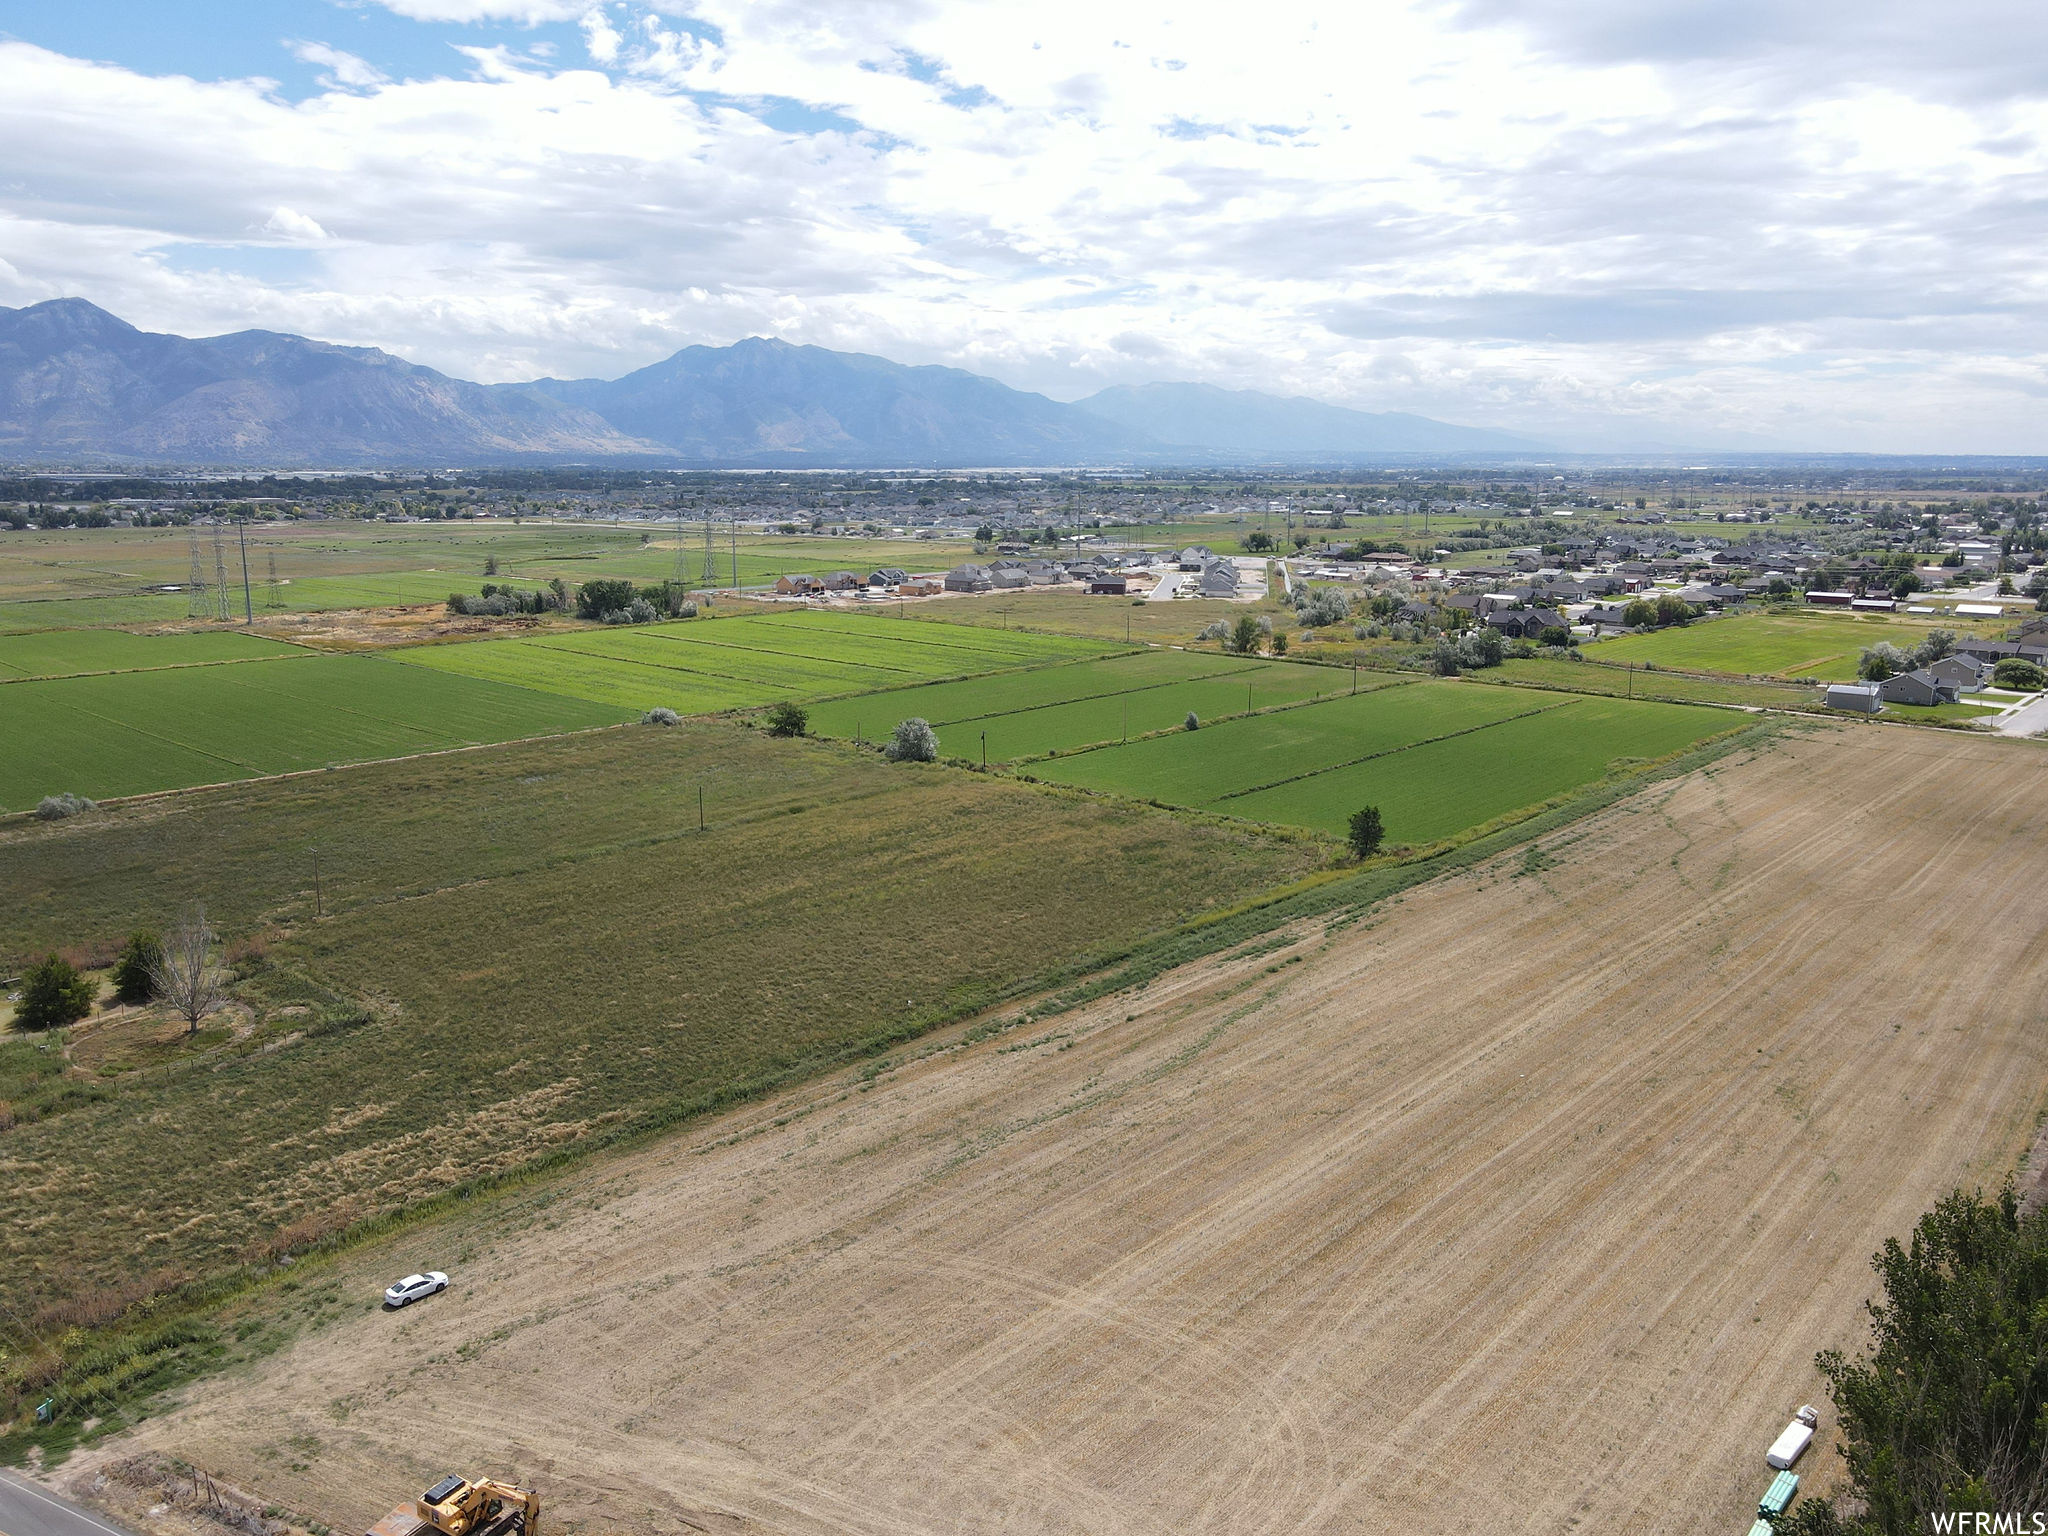 Drone / aerial view with a rural view and a mountain view